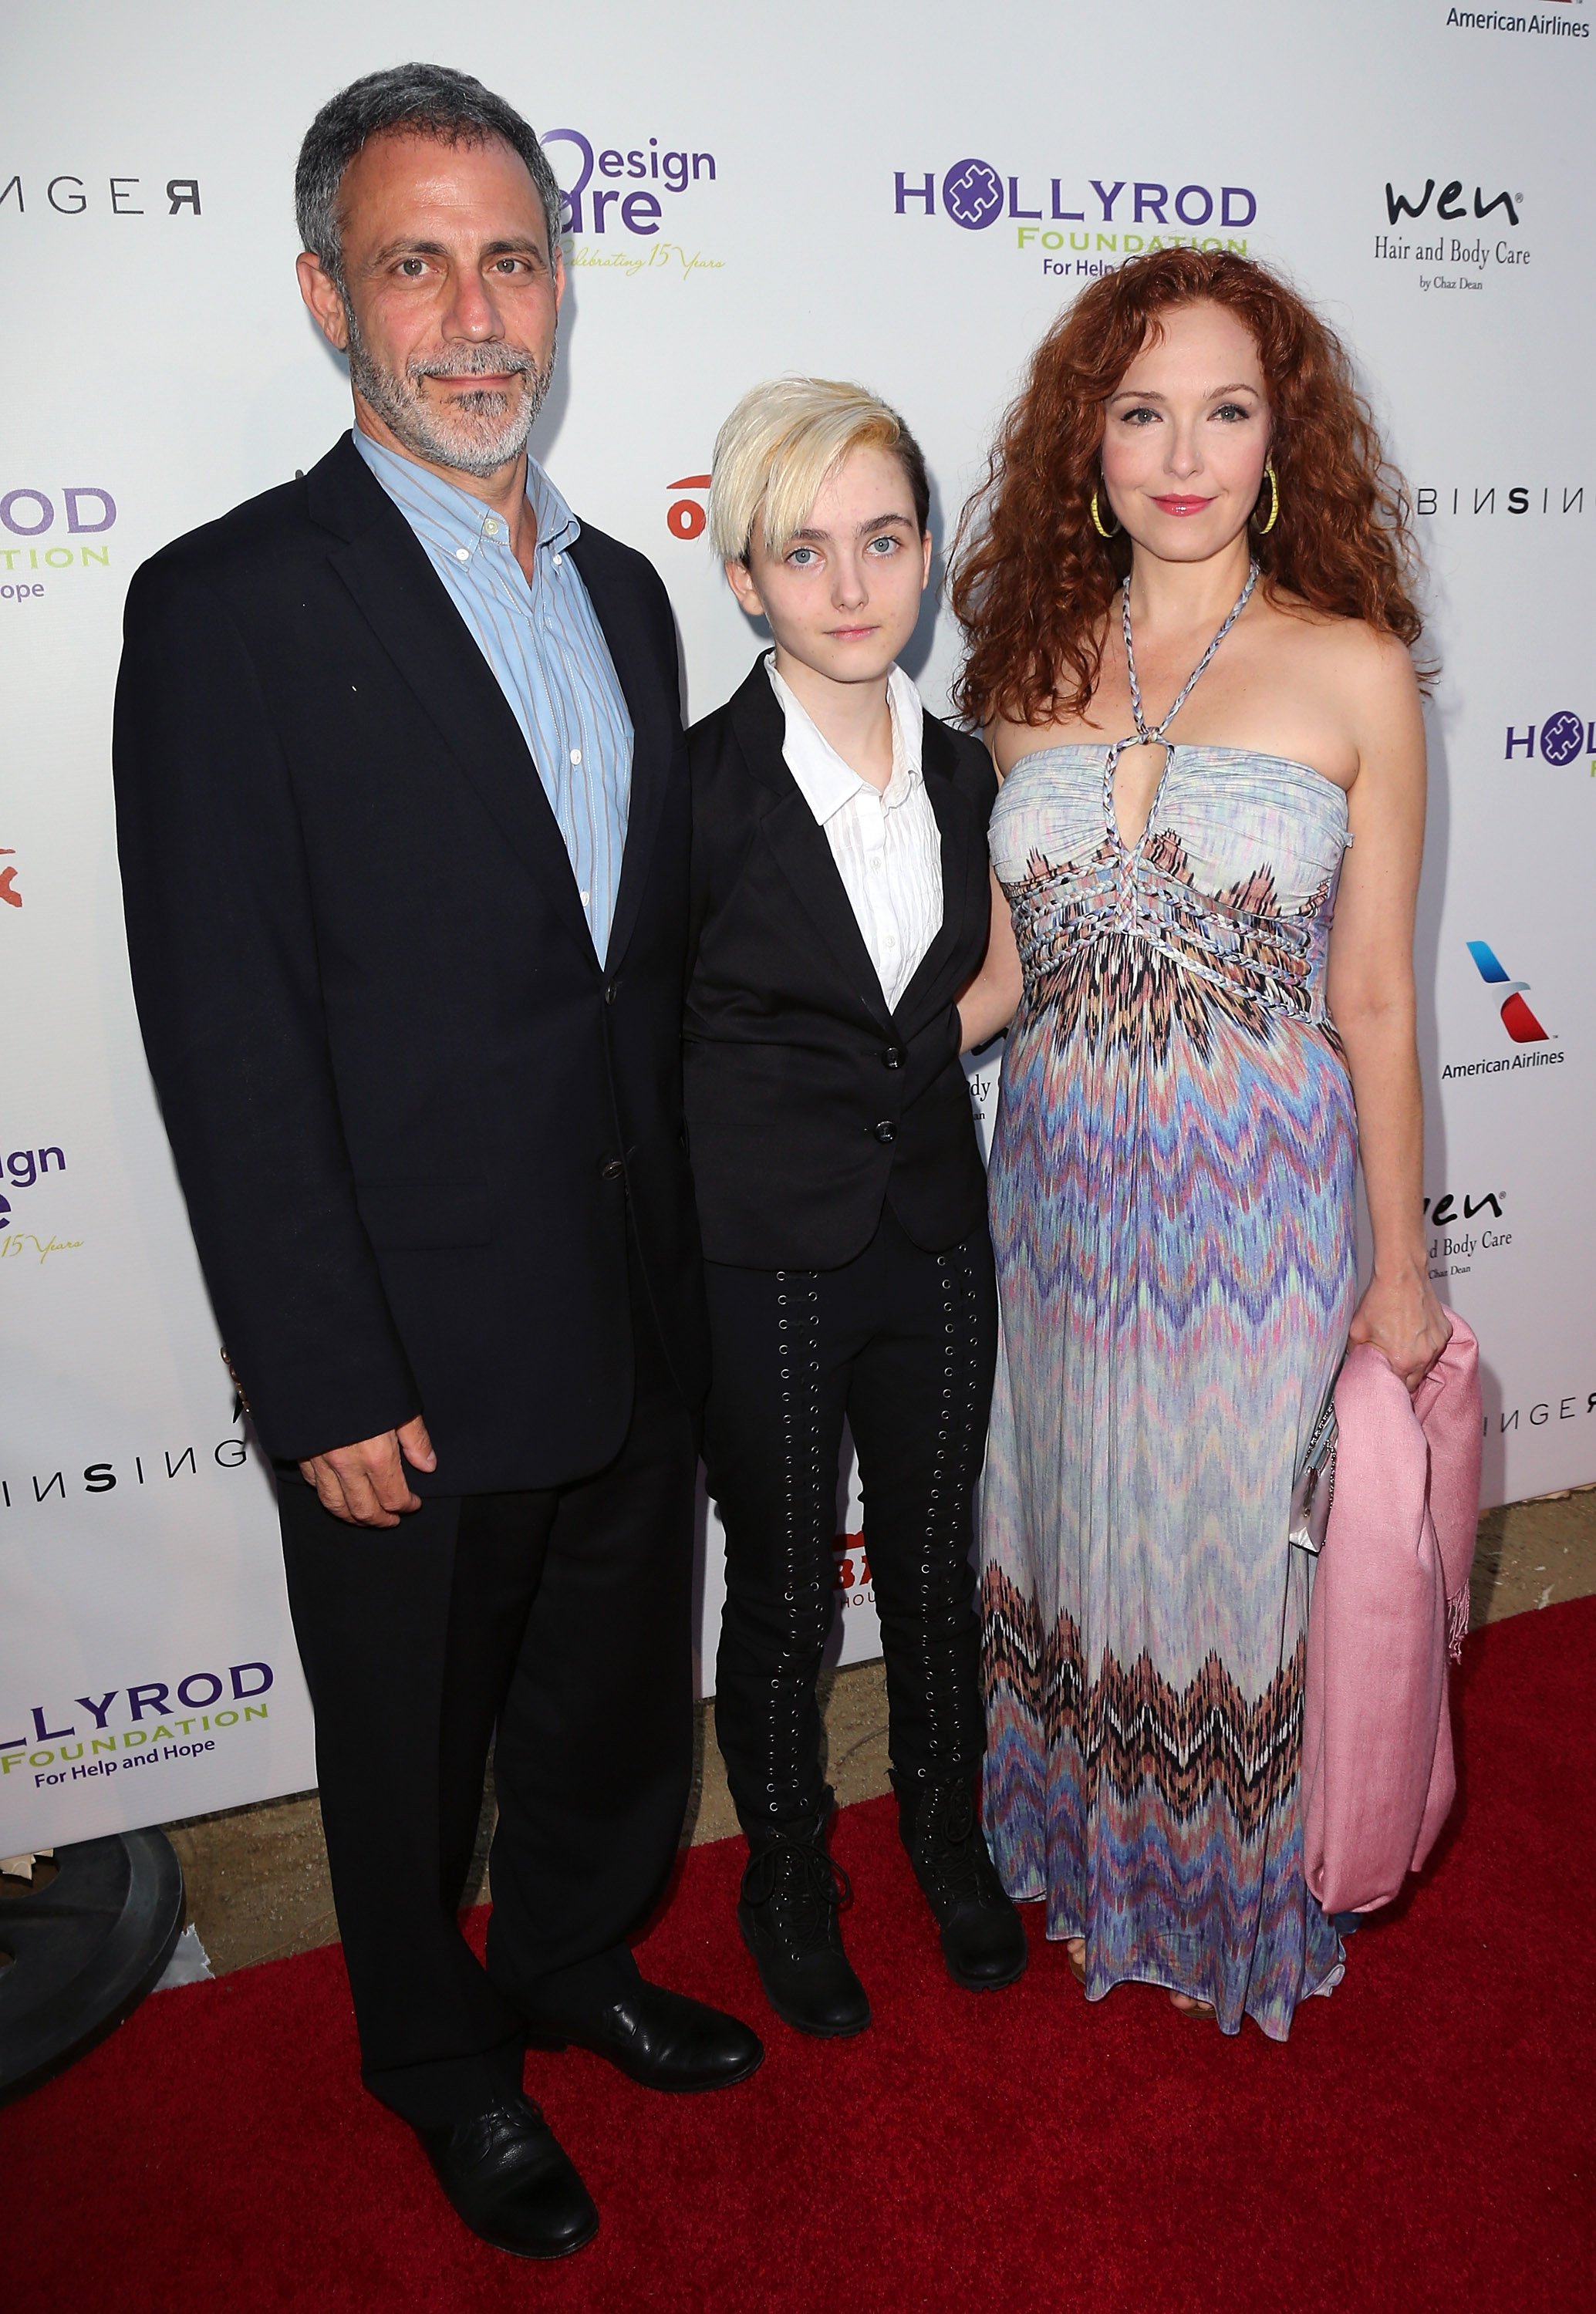 Michael Plonsker, Stella Ritter and actress Amy Yasbeck attend the 15th Annual DesignCare on July 27, 2013 in Malibu, California. | Source: Getty Images